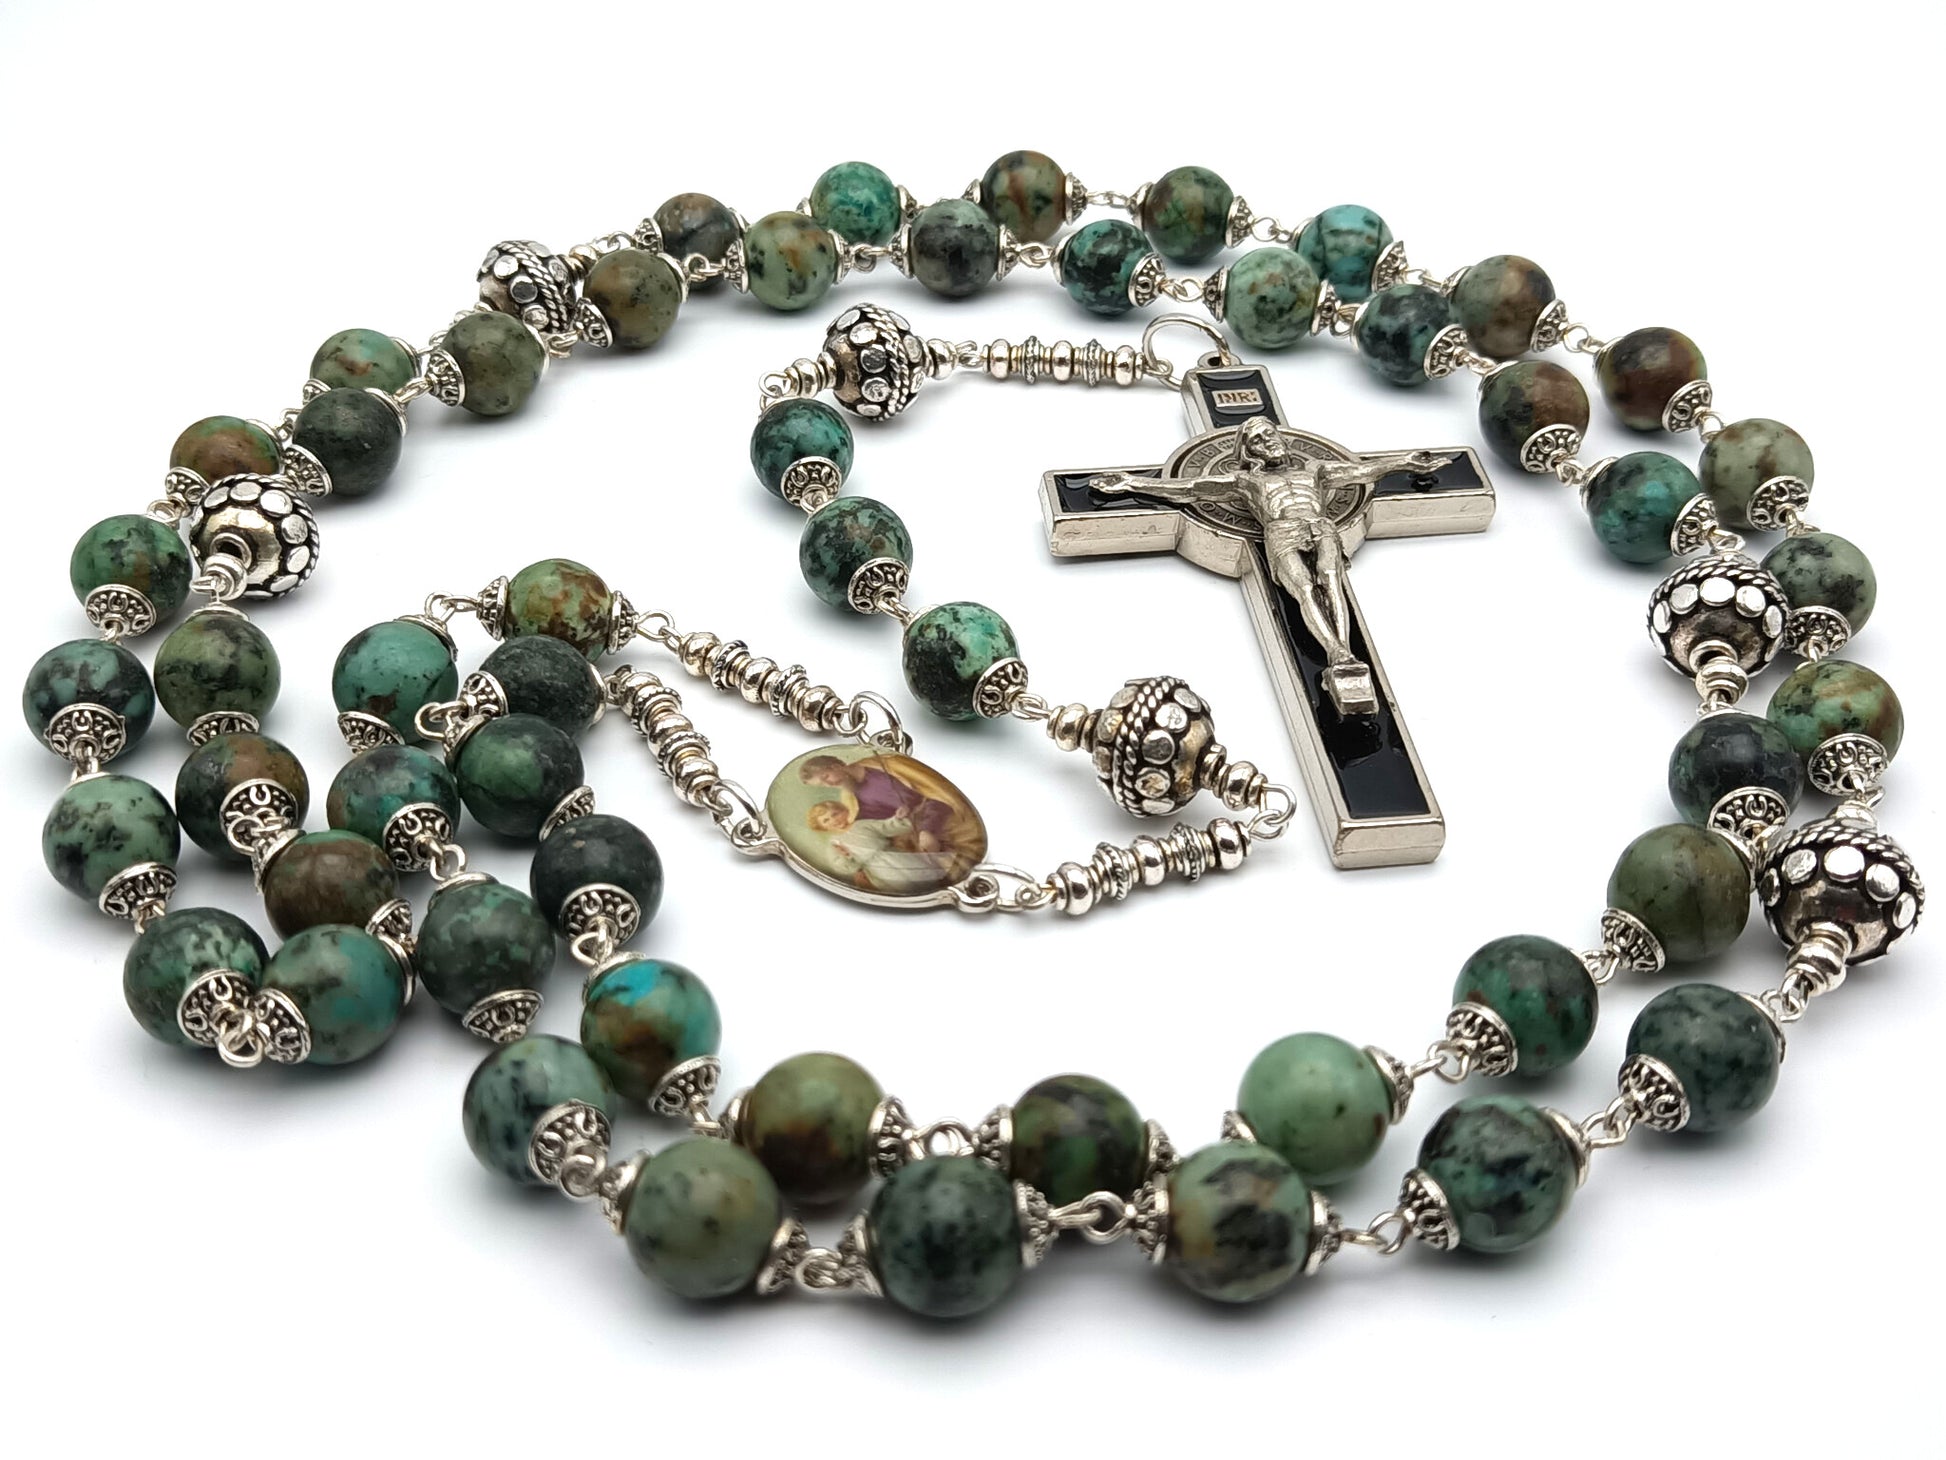 Holy Family unique rosary beads with green gemstone beads, silver pater beads, silver and black enamel crucifix and picture centre medal. 